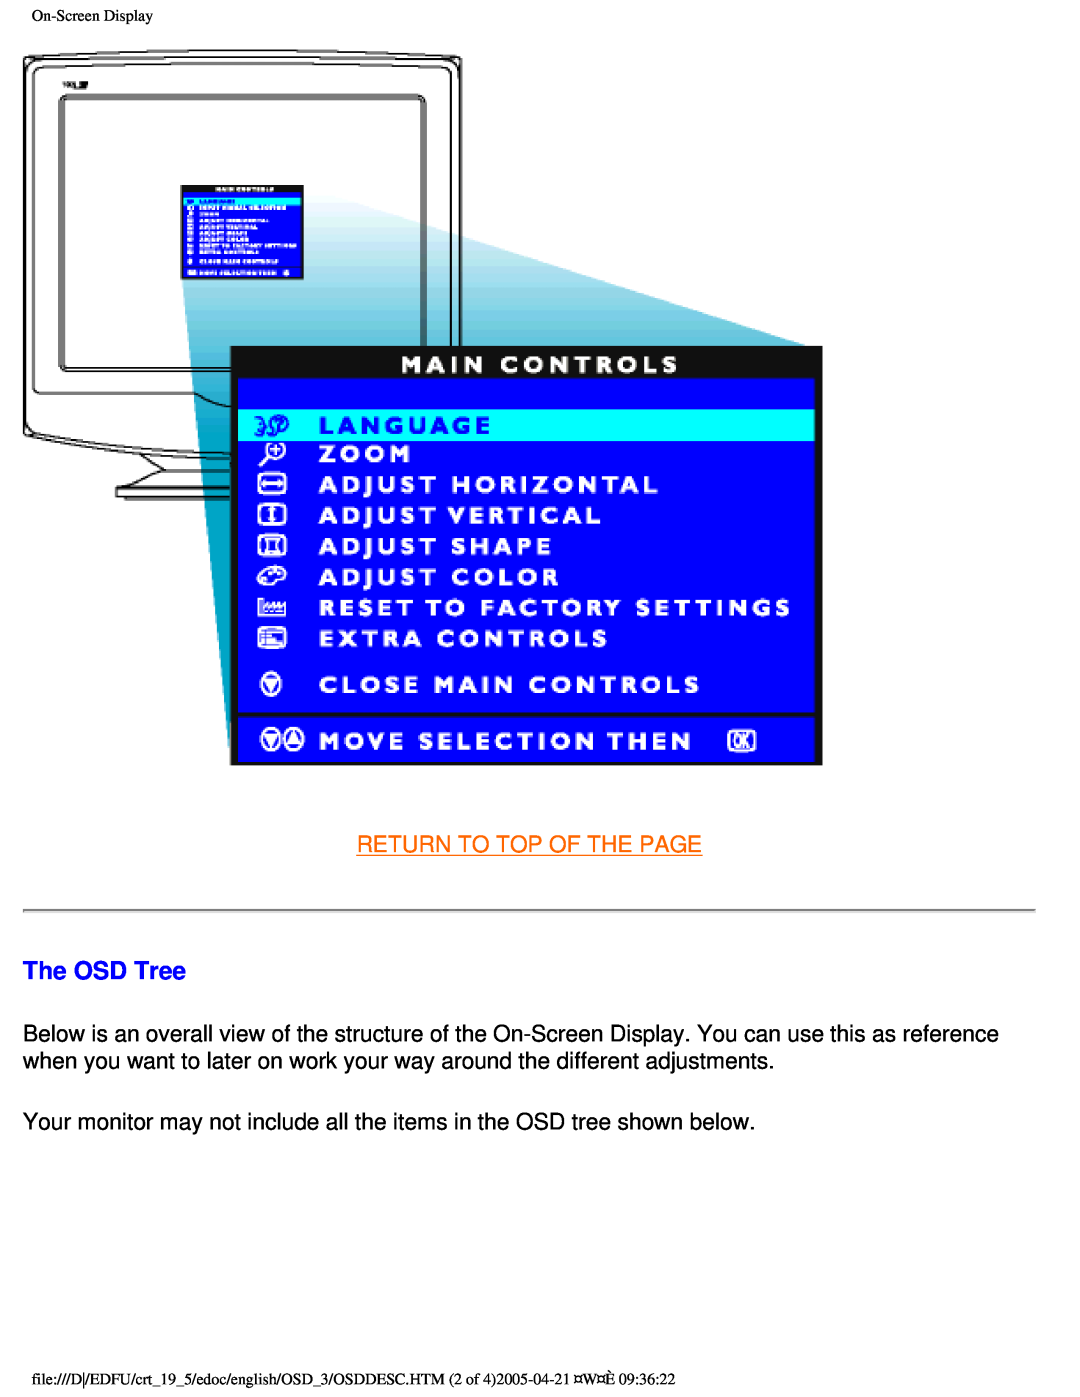 Philips 109F user manual The OSD Tree, Return To Top Of The Page, On-ScreenDisplay 